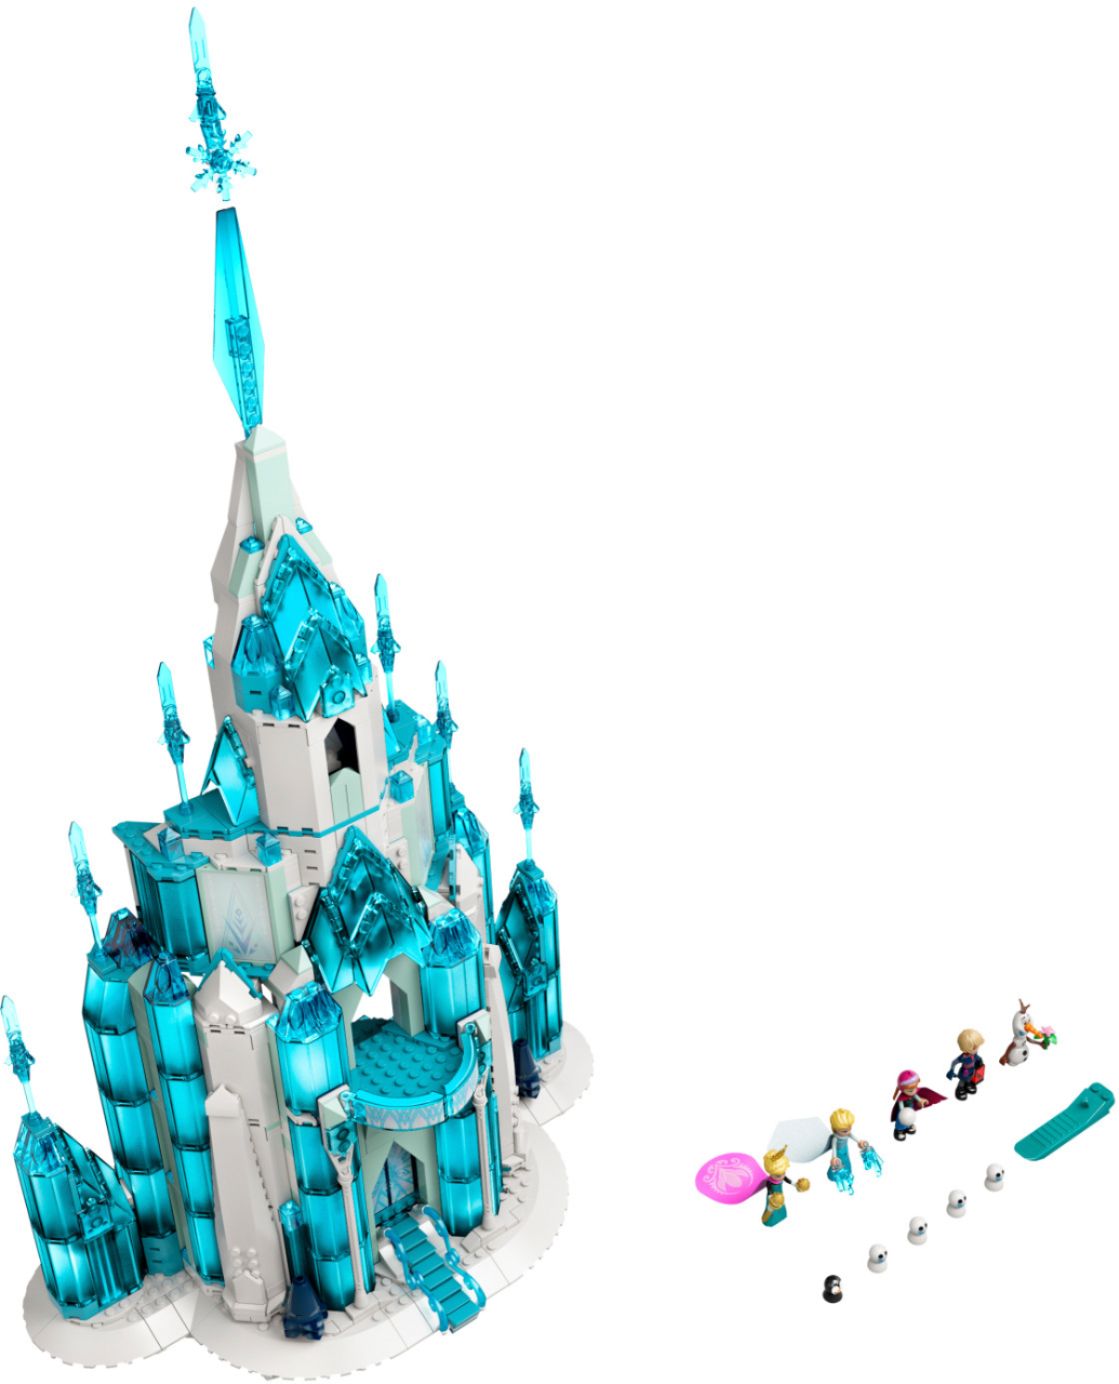  LEGO Disney Princess The Ice Castle Building Toy 43197, with  Frozen Anna and Elsa Mini Doll Figures and Olaf Figure, Disney Castle Kit  to Build, Disney Gift Idea, Castle Toy for